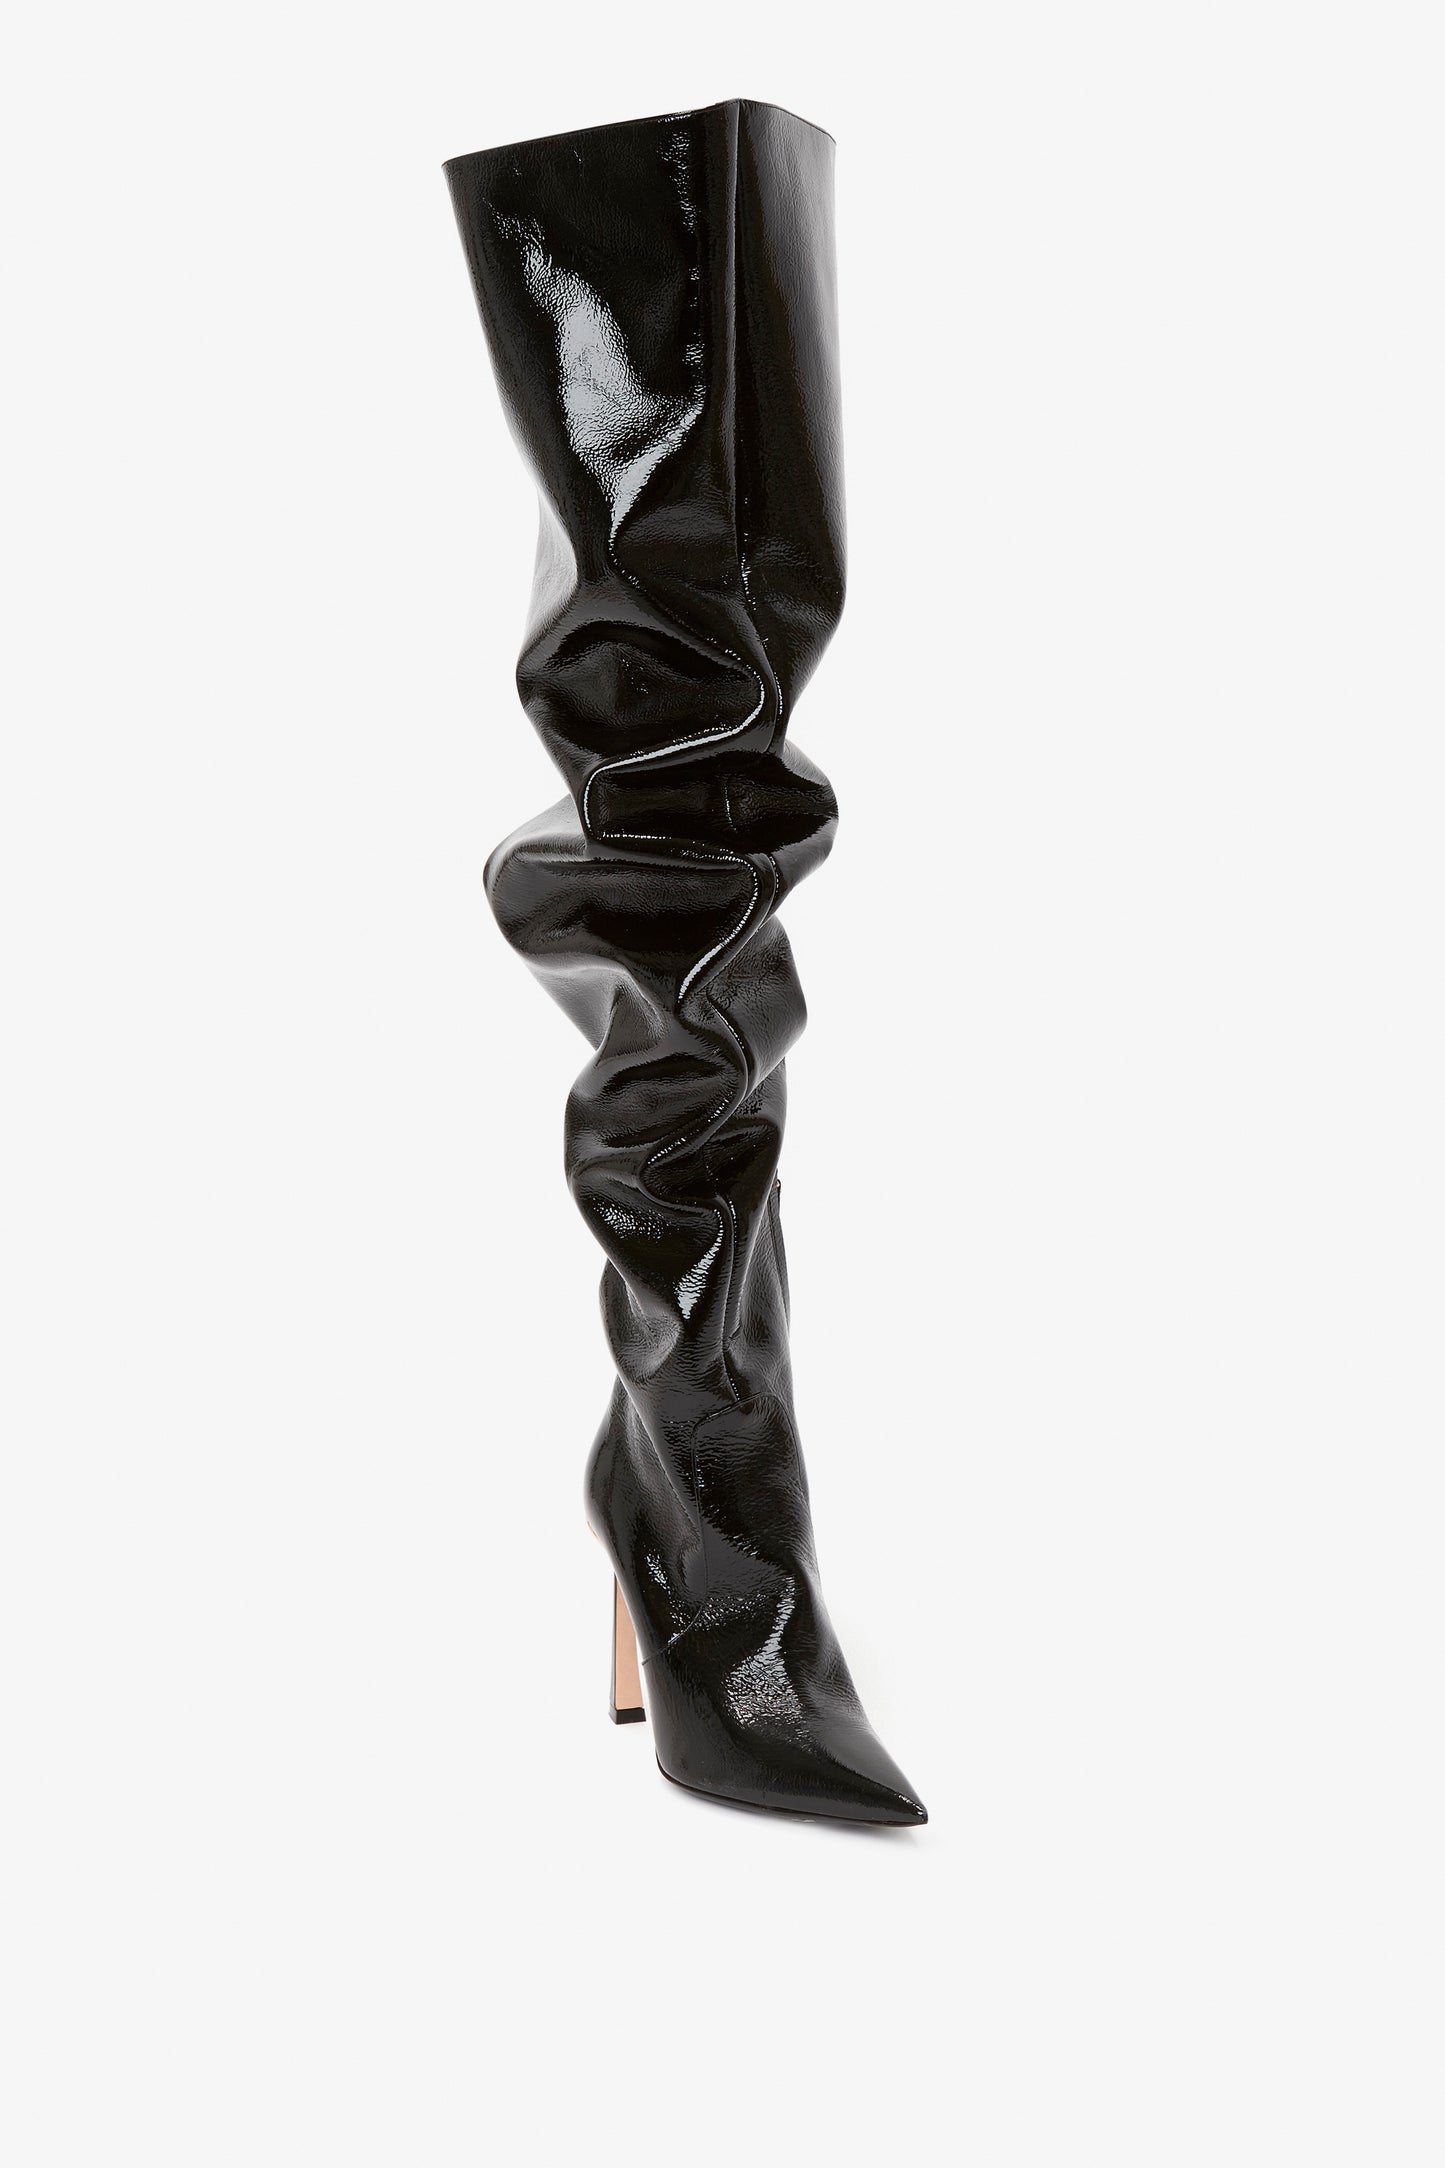 Thigh High Pointy Boot in Black Patent